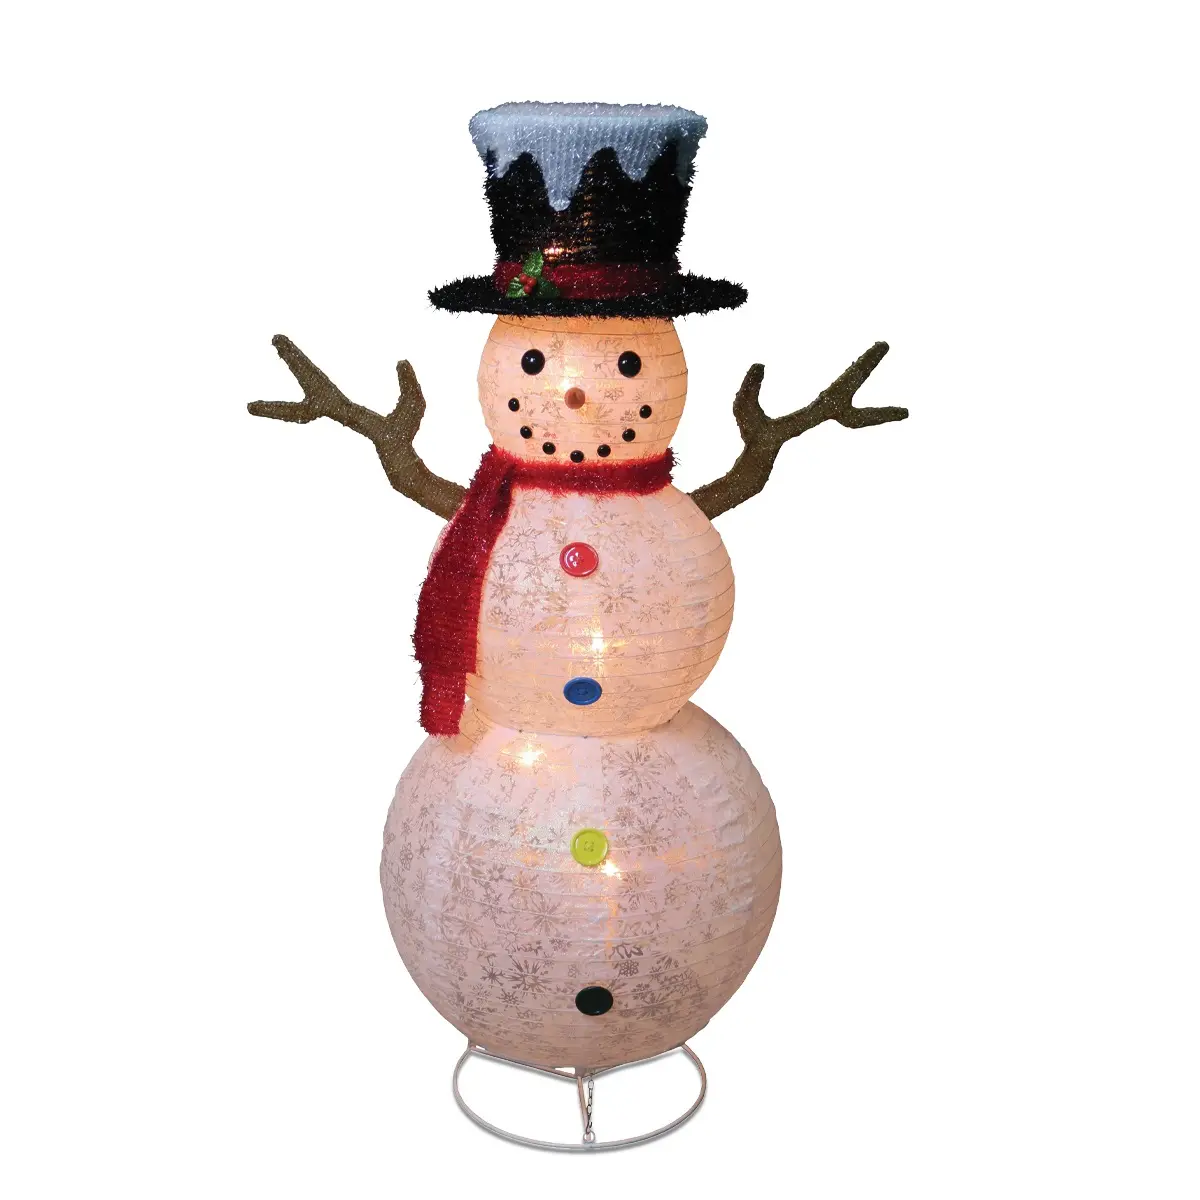 Outdoor Christmas LED Lights Decorative White Foldable Printed Fabric Snowman with Top Hat and Welcome Holiday Lights Snowman